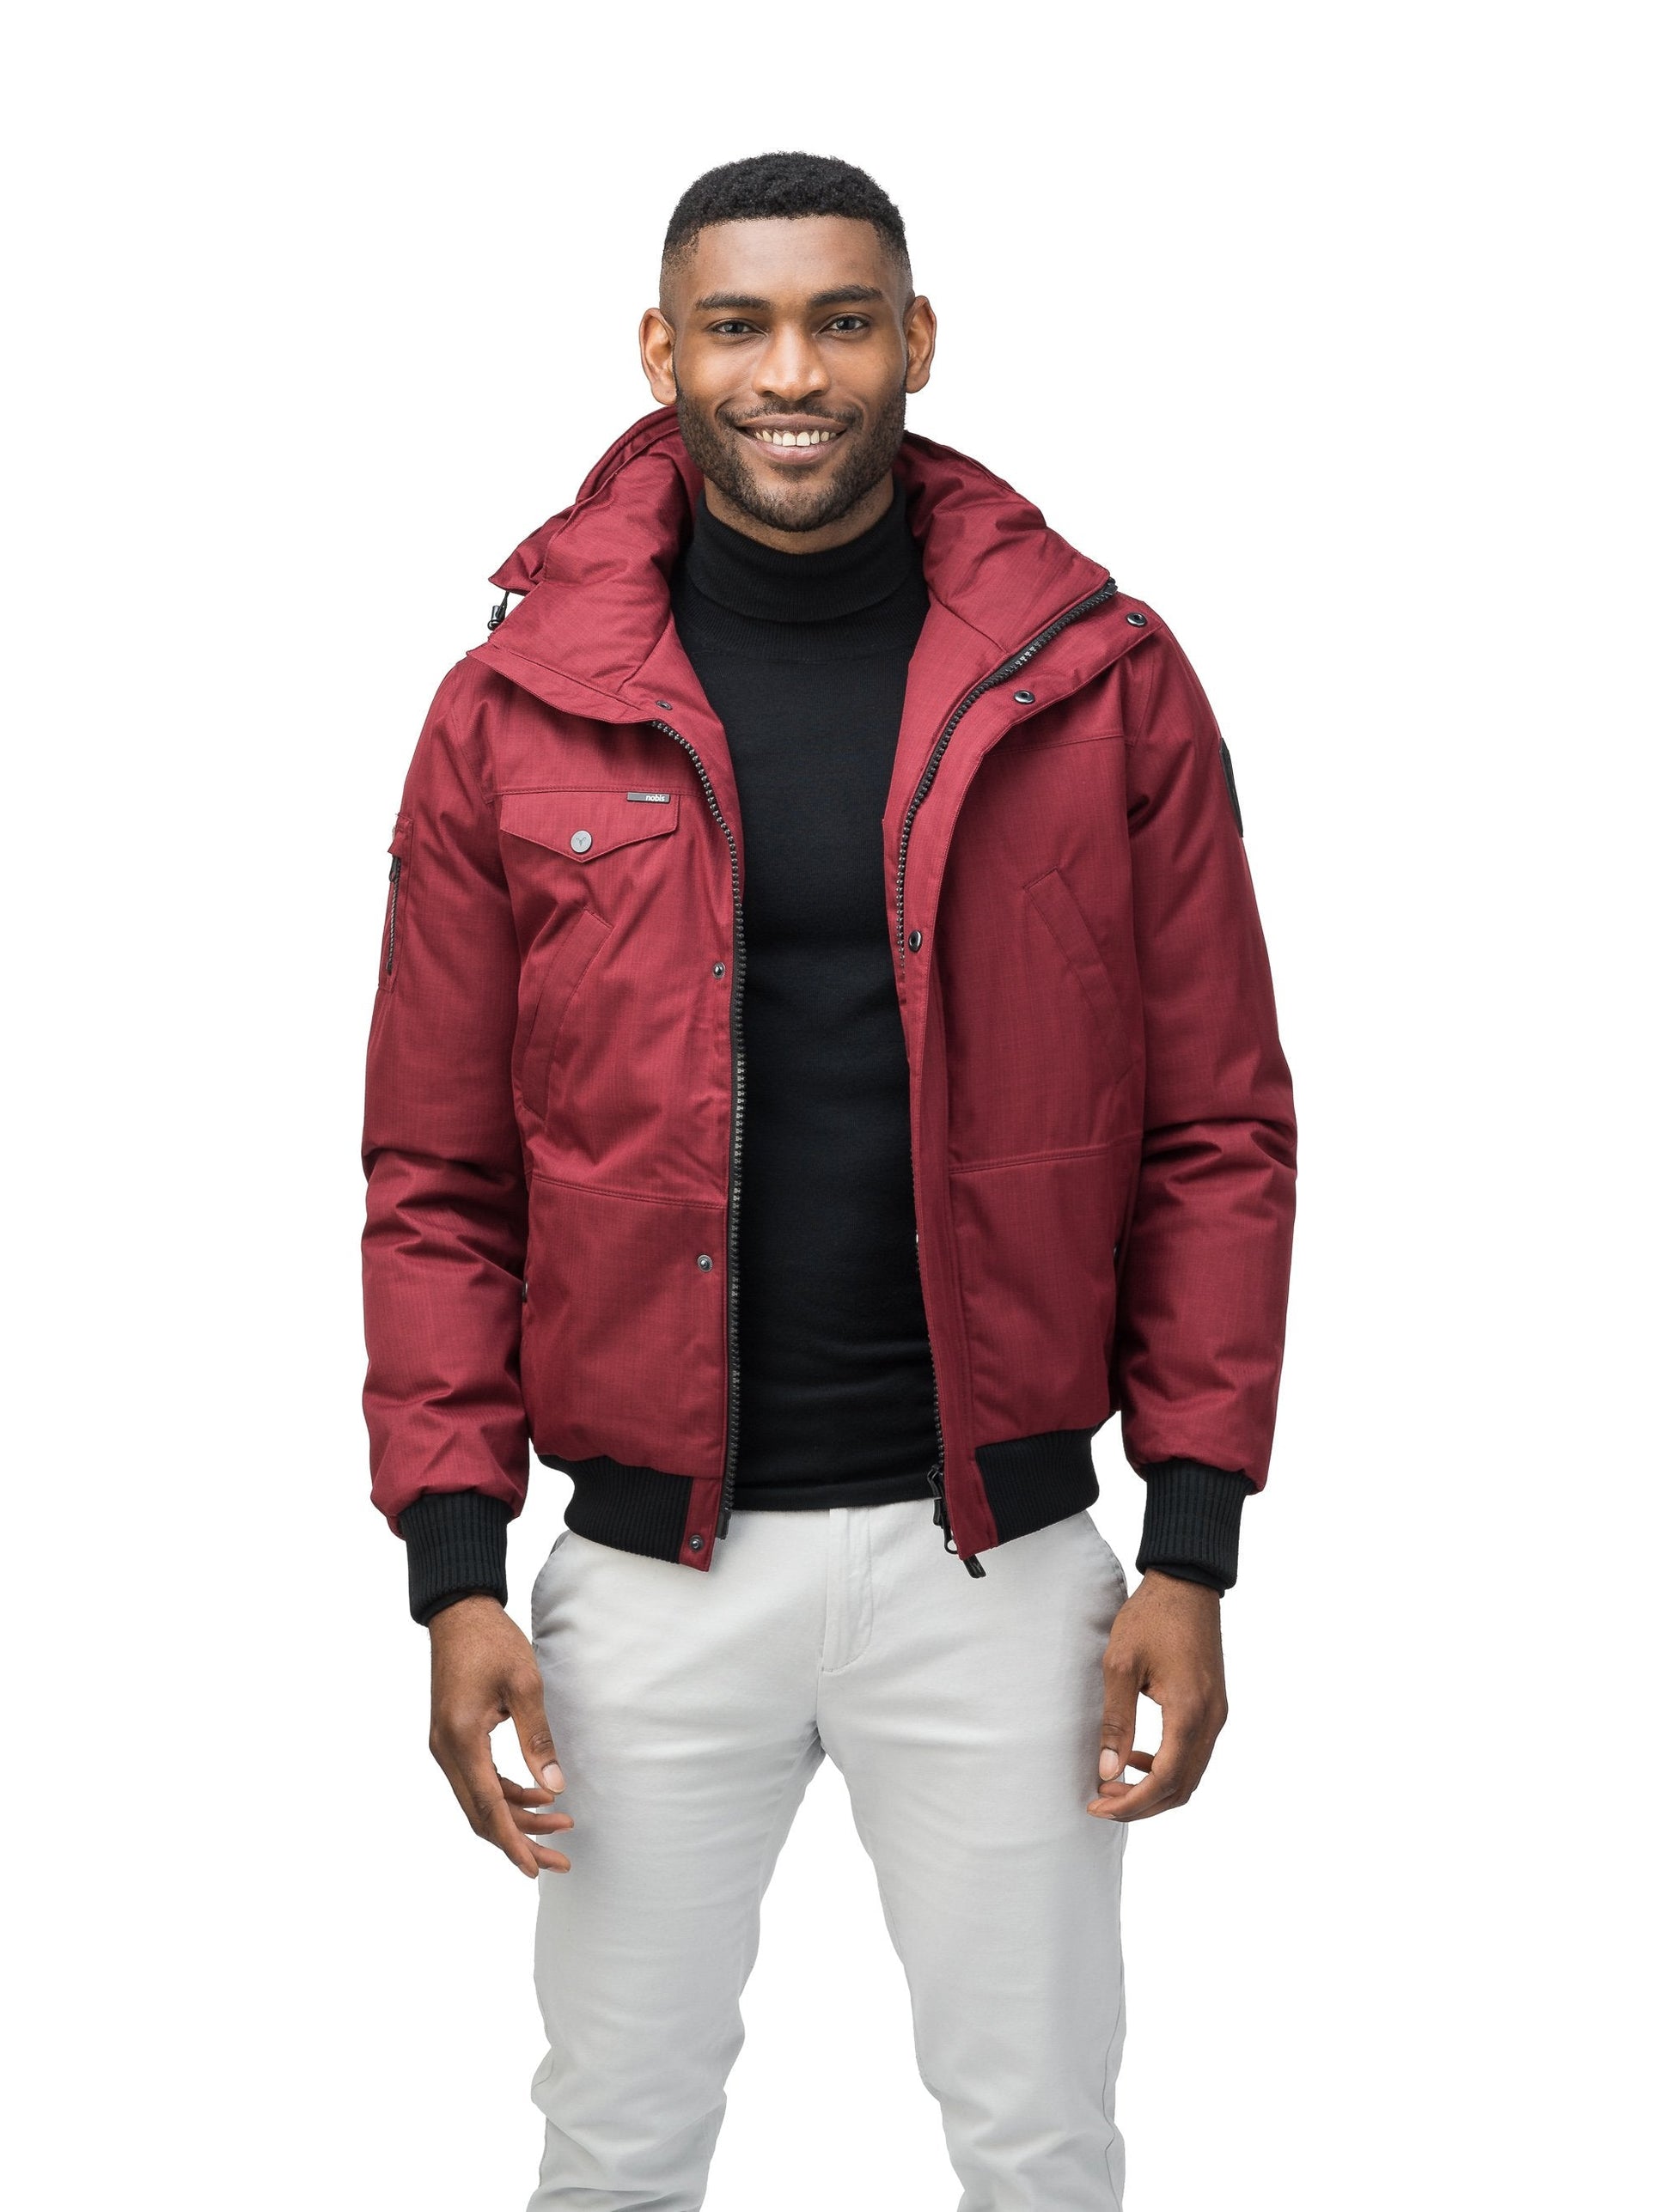 Men's sleek down filled bomber jacket with clean details and a fur free hood in CH Cabernet